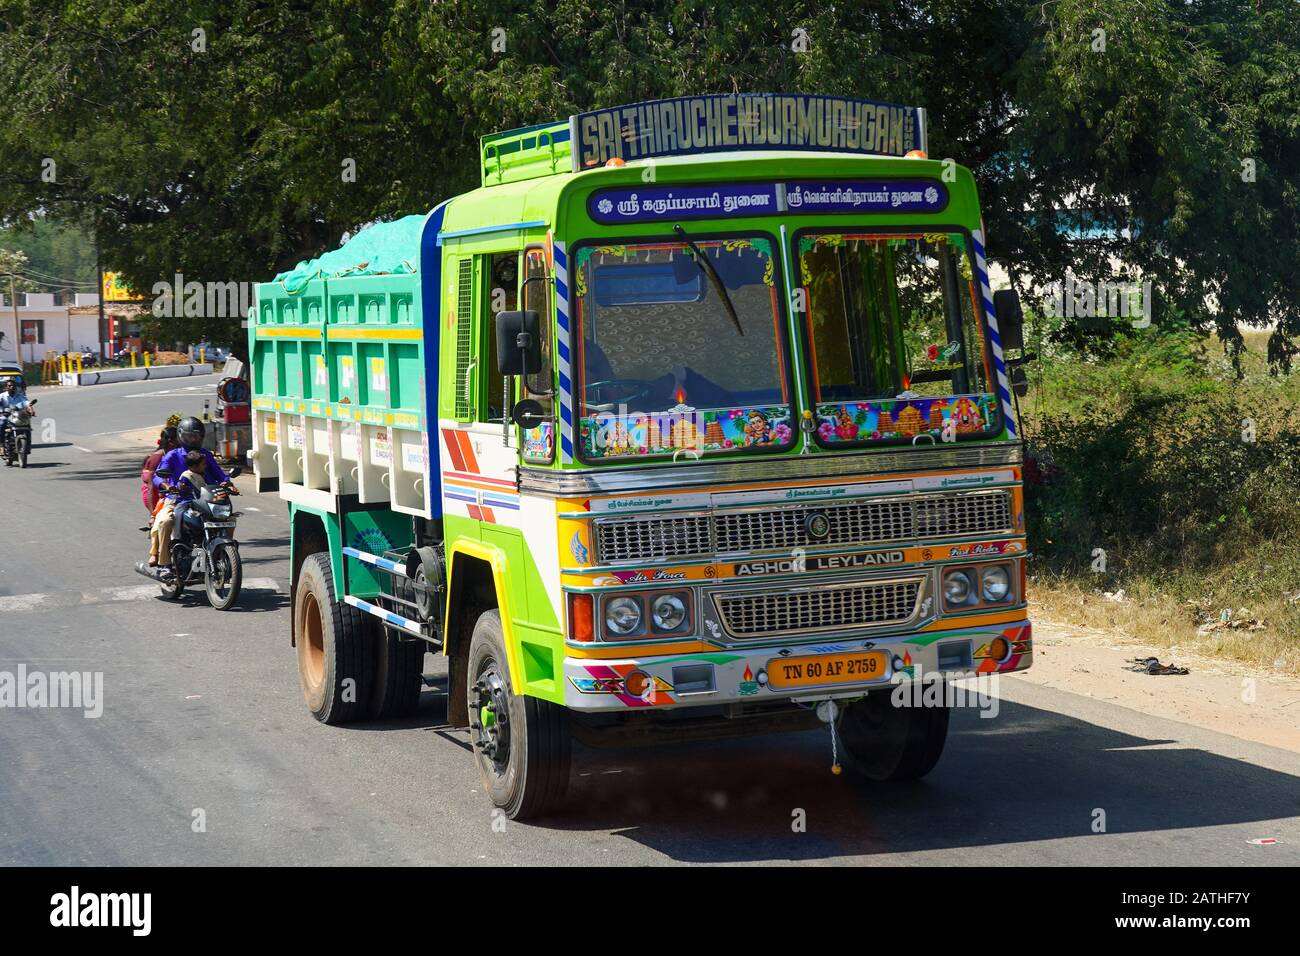 A brightly decorated lorry. From a series of travel photos in Kerala, South India. Photo date: Sunday, January 12, 2020. Photo: Roger Garfield/Alamy Stock Photo